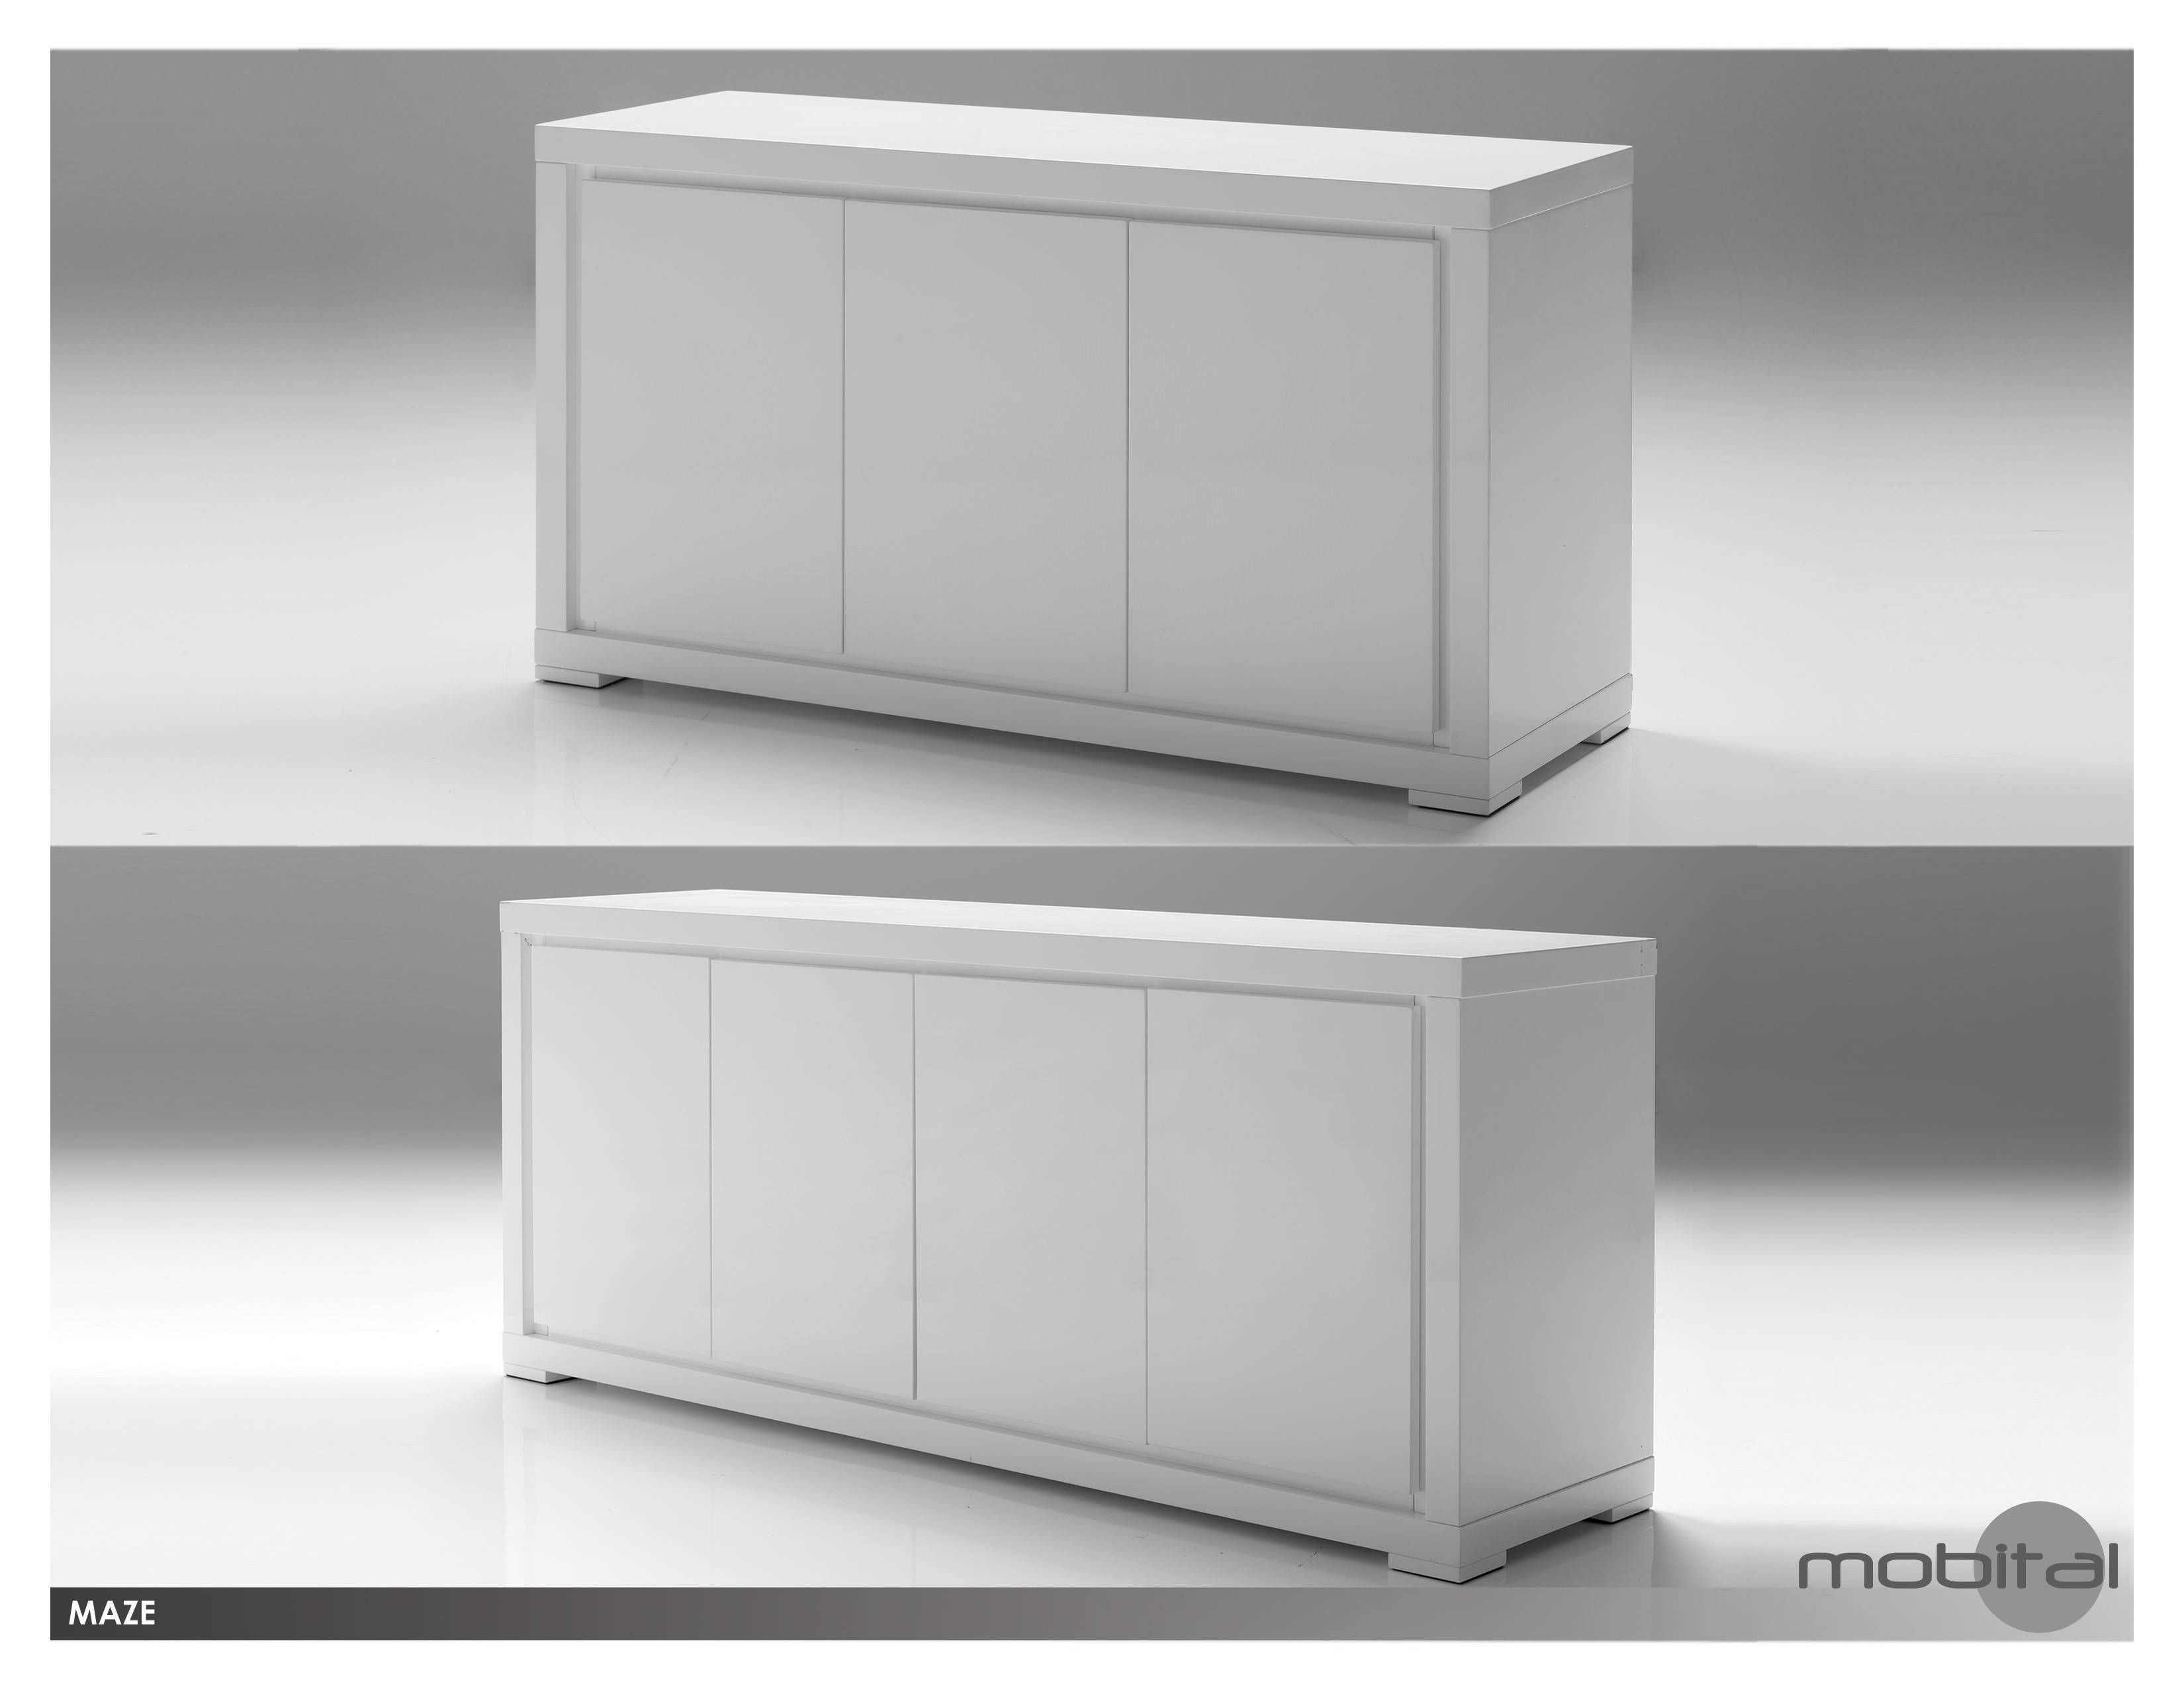 Maze Buffet 4 Door High Gloss In White 1pcmobital Throughout Cheap White High Gloss Sideboard (View 11 of 20)